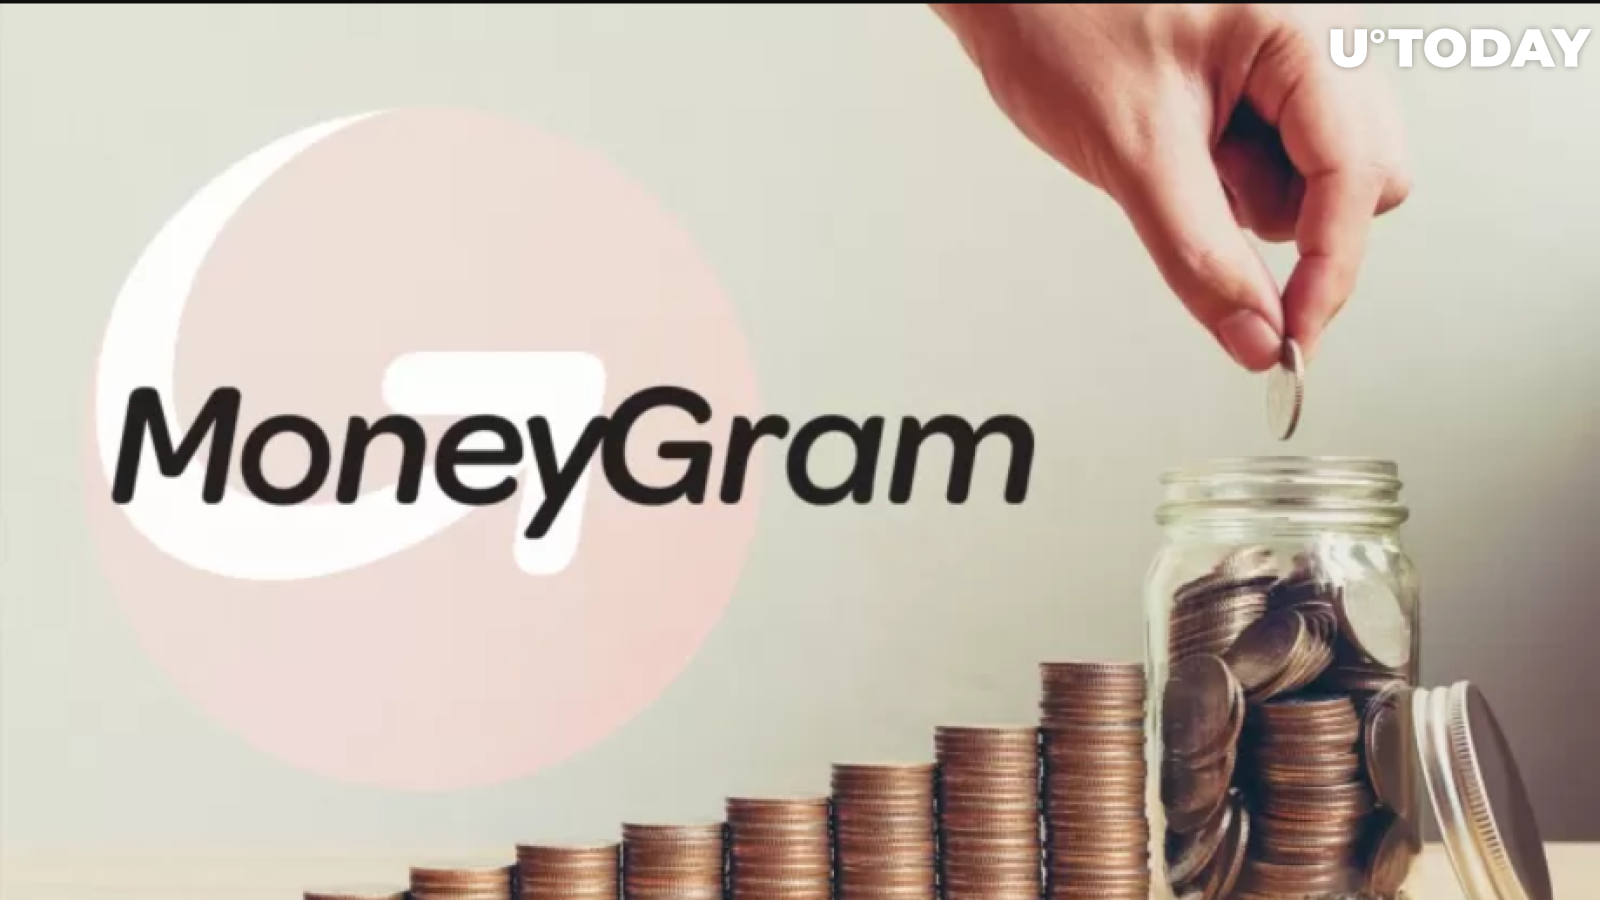 Ripple's Partnership with MoneyGram Criticized by Financial Times